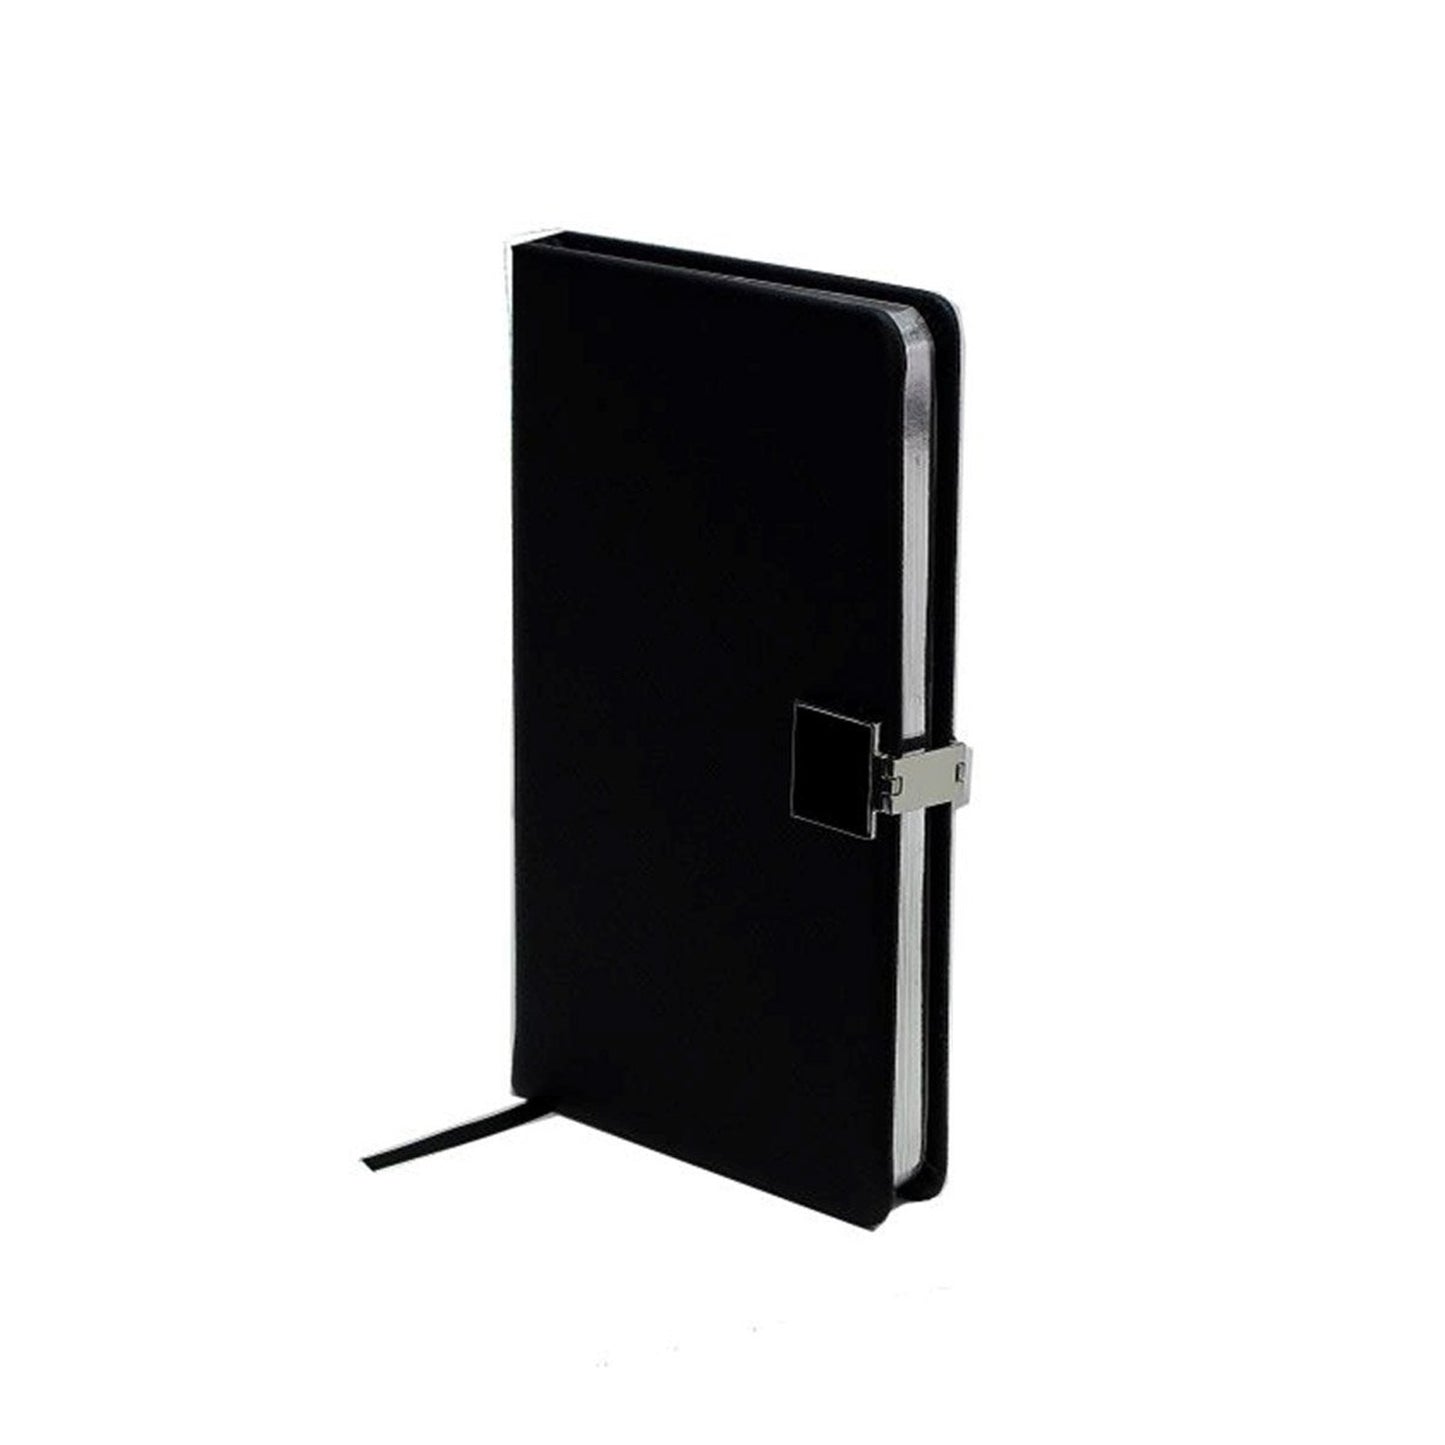 Addison Ross Notebook A6 with Silver